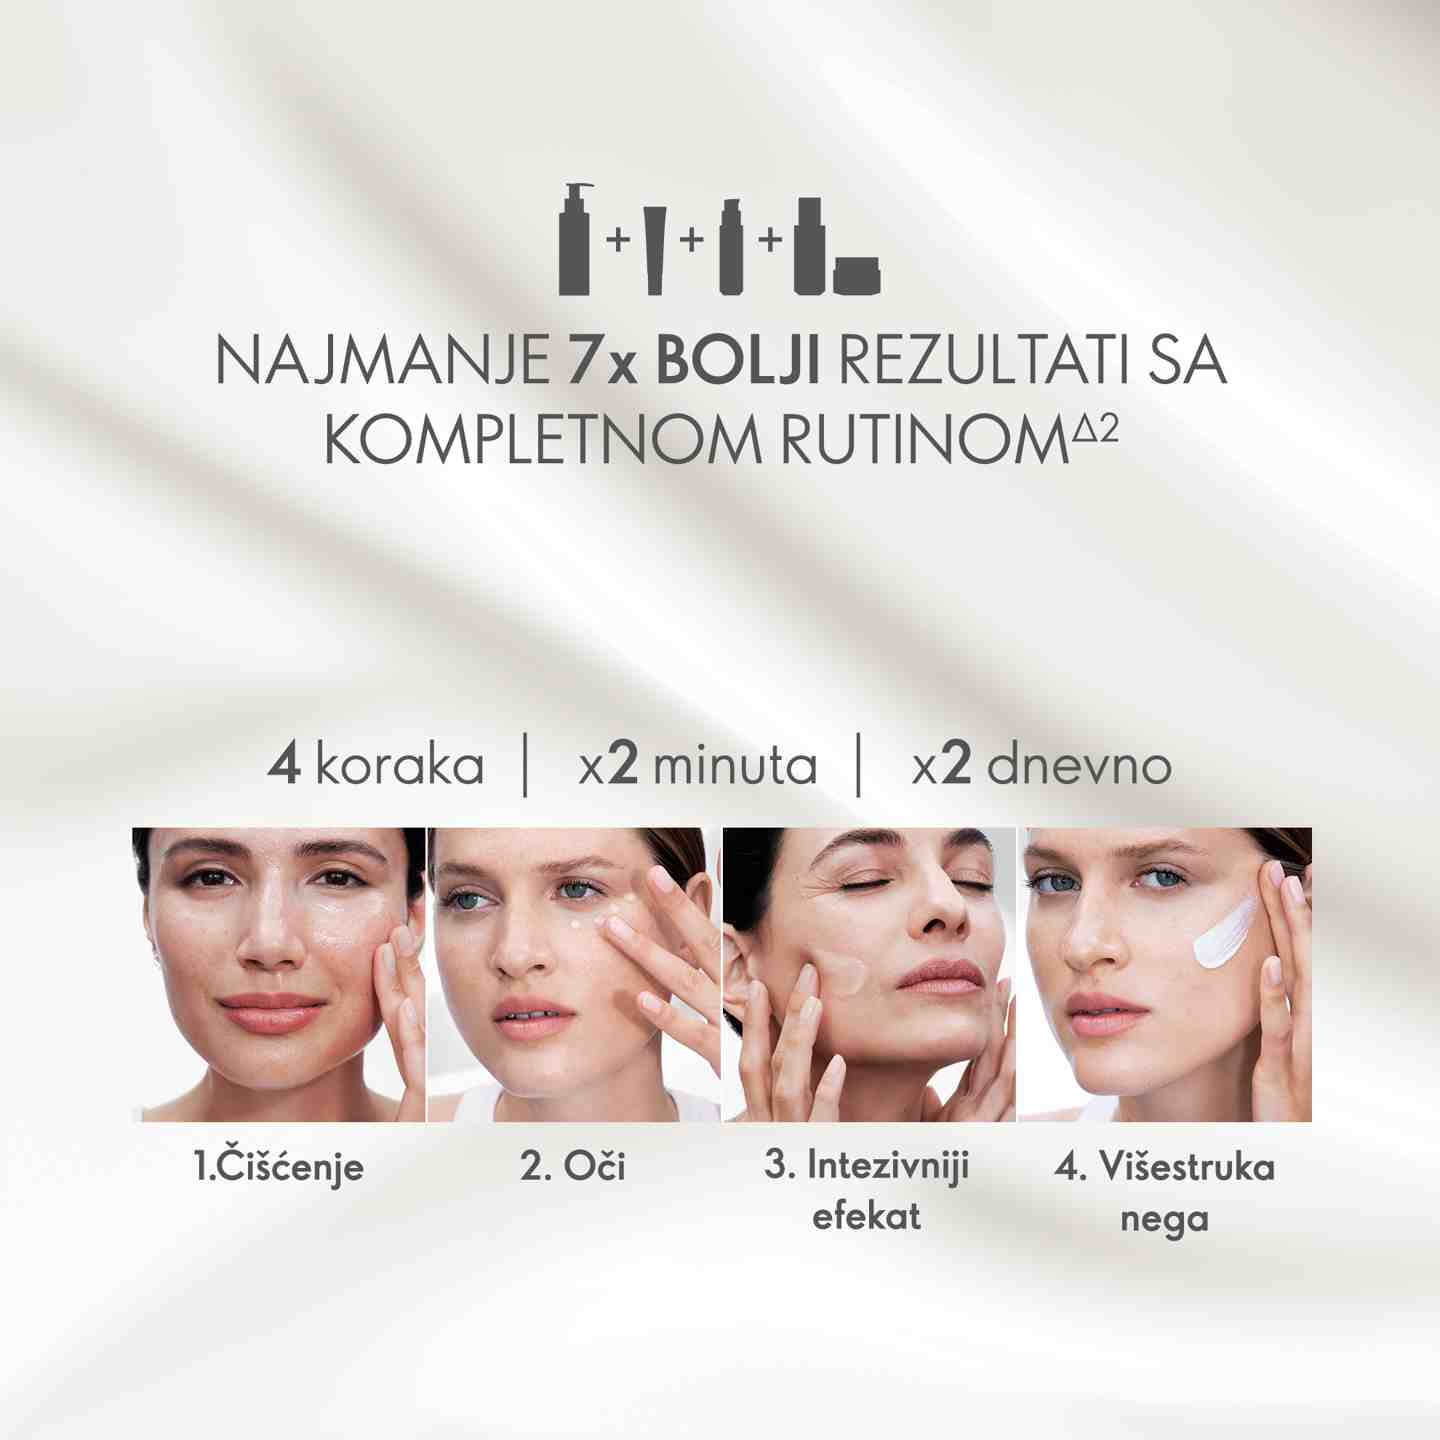 https://media-cdn.oriflame.com/productImage?externalMediaId=product-management-media%2fProducts%2f45595%2fRS%2f45595_5.png&id=17551043&version=2